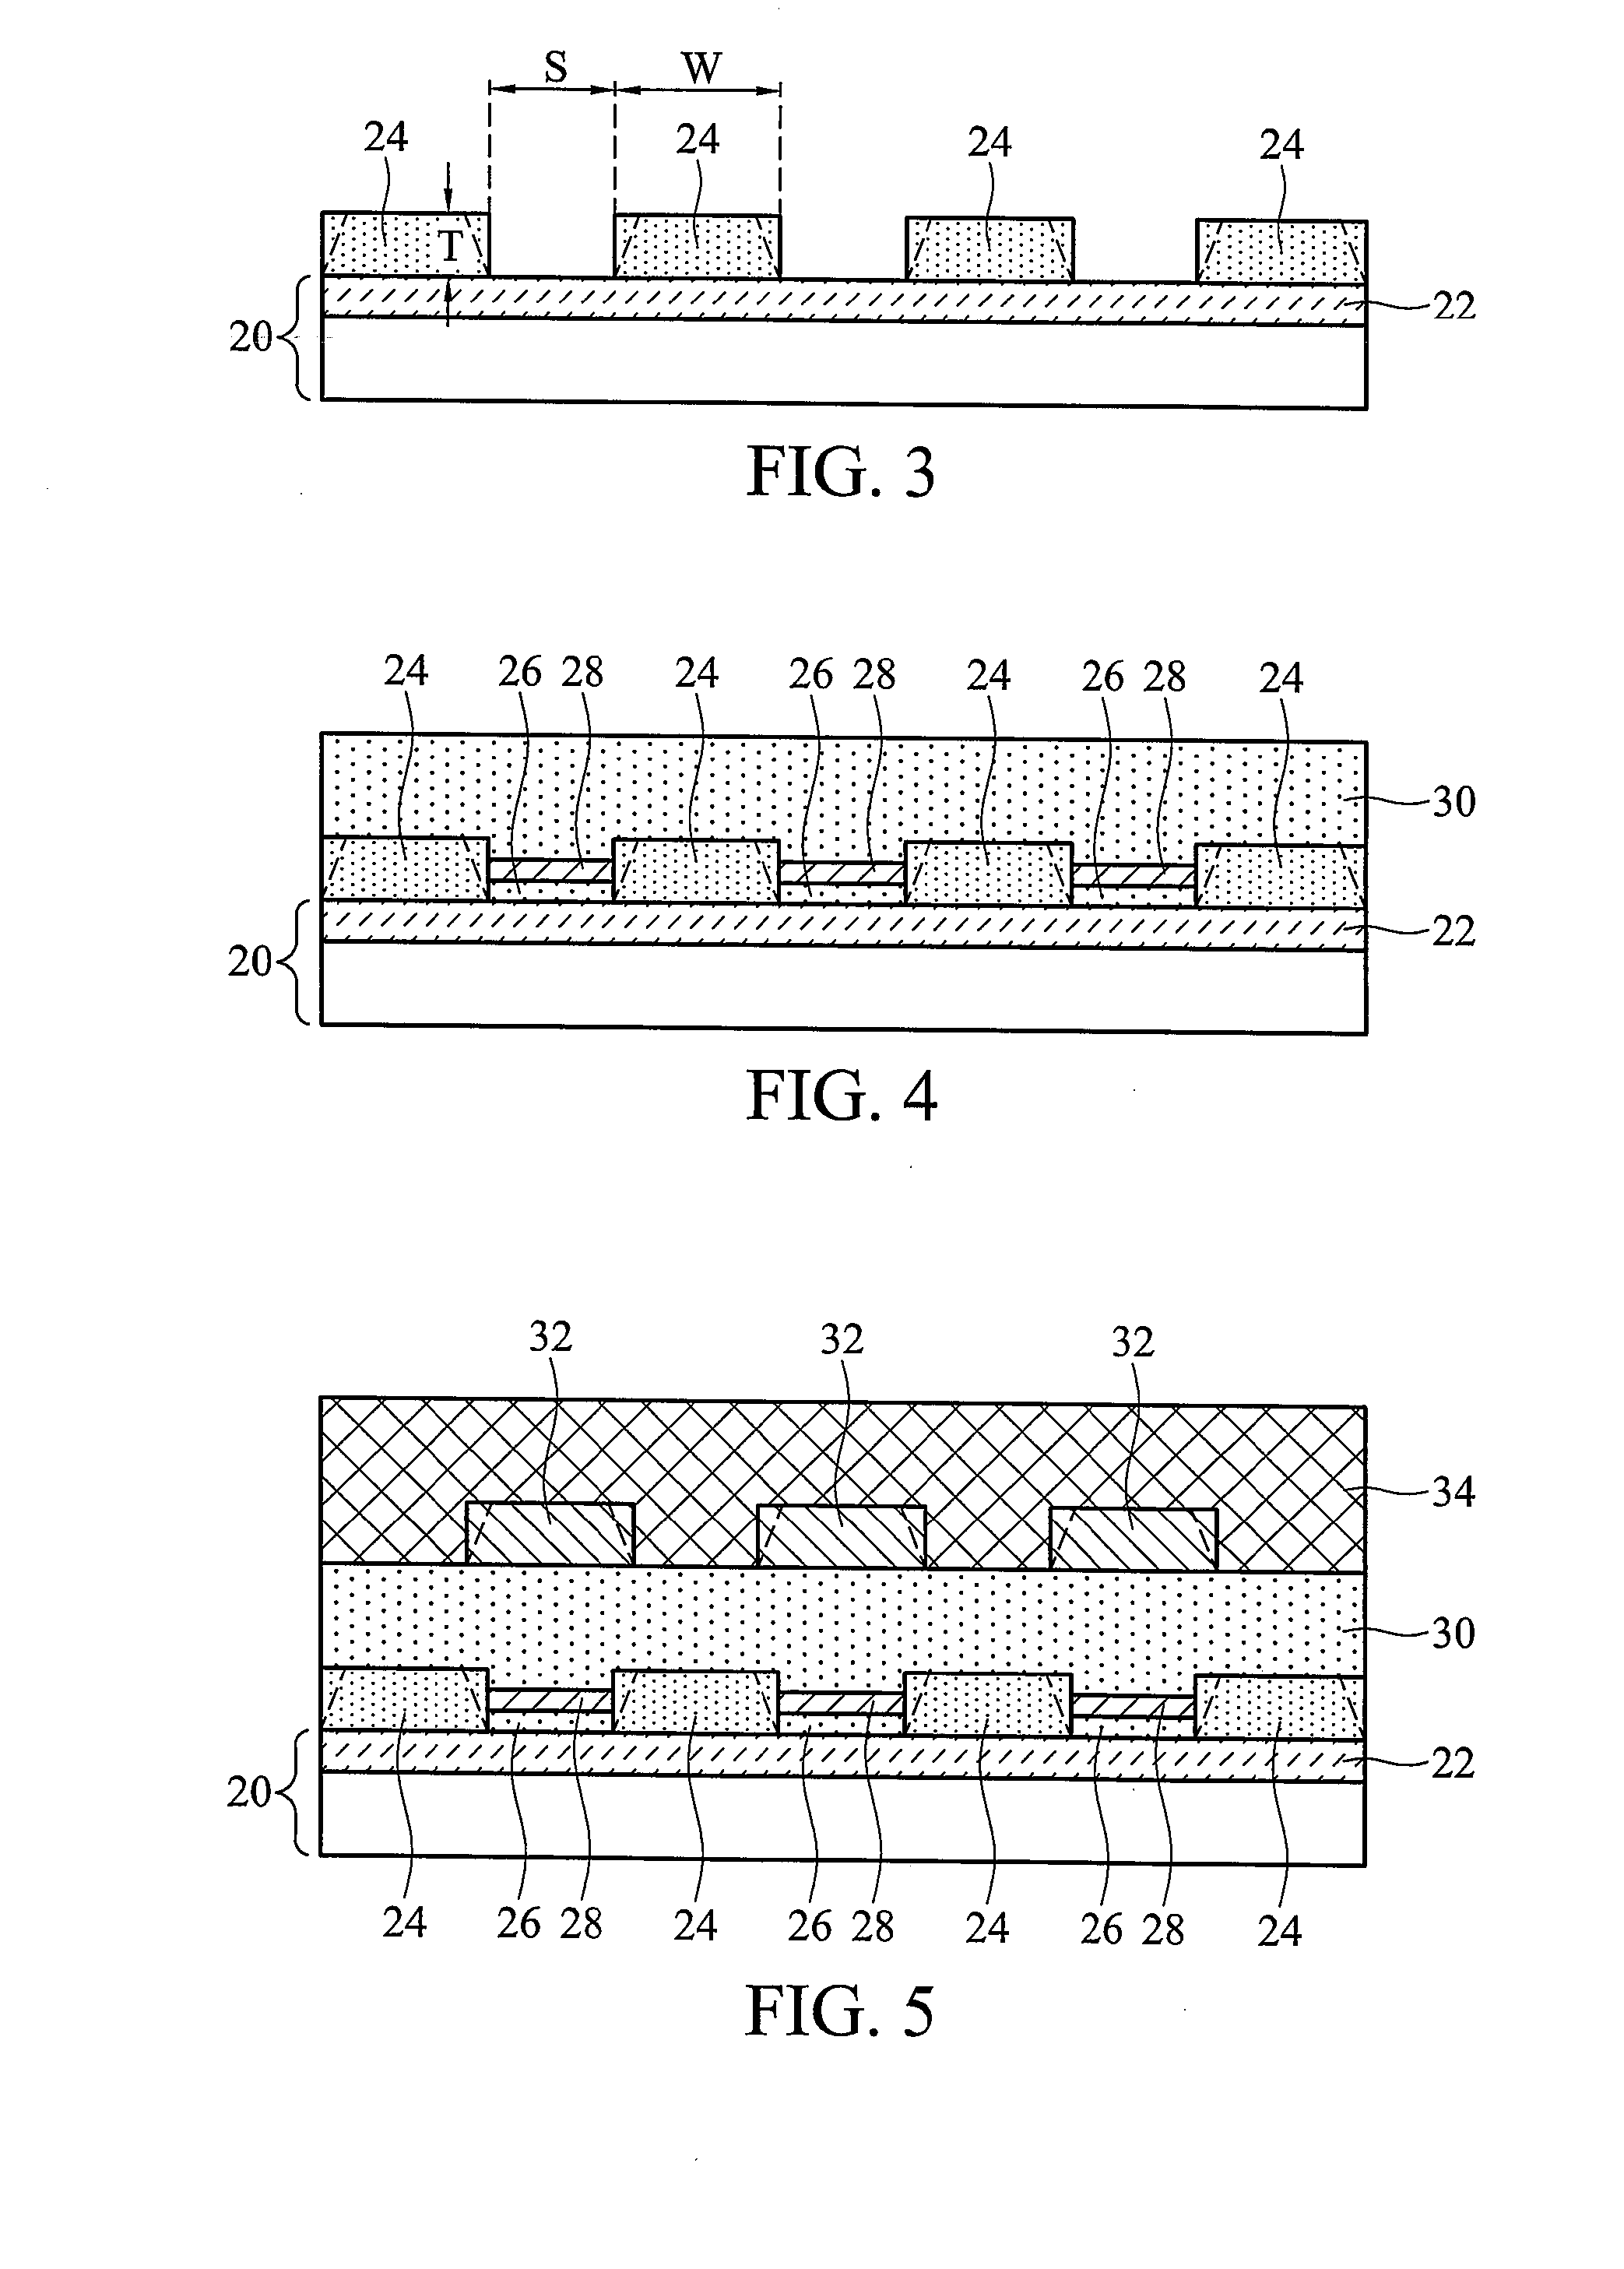 III-V Compound Semiconductor Epitaxy Using Lateral Overgrowth